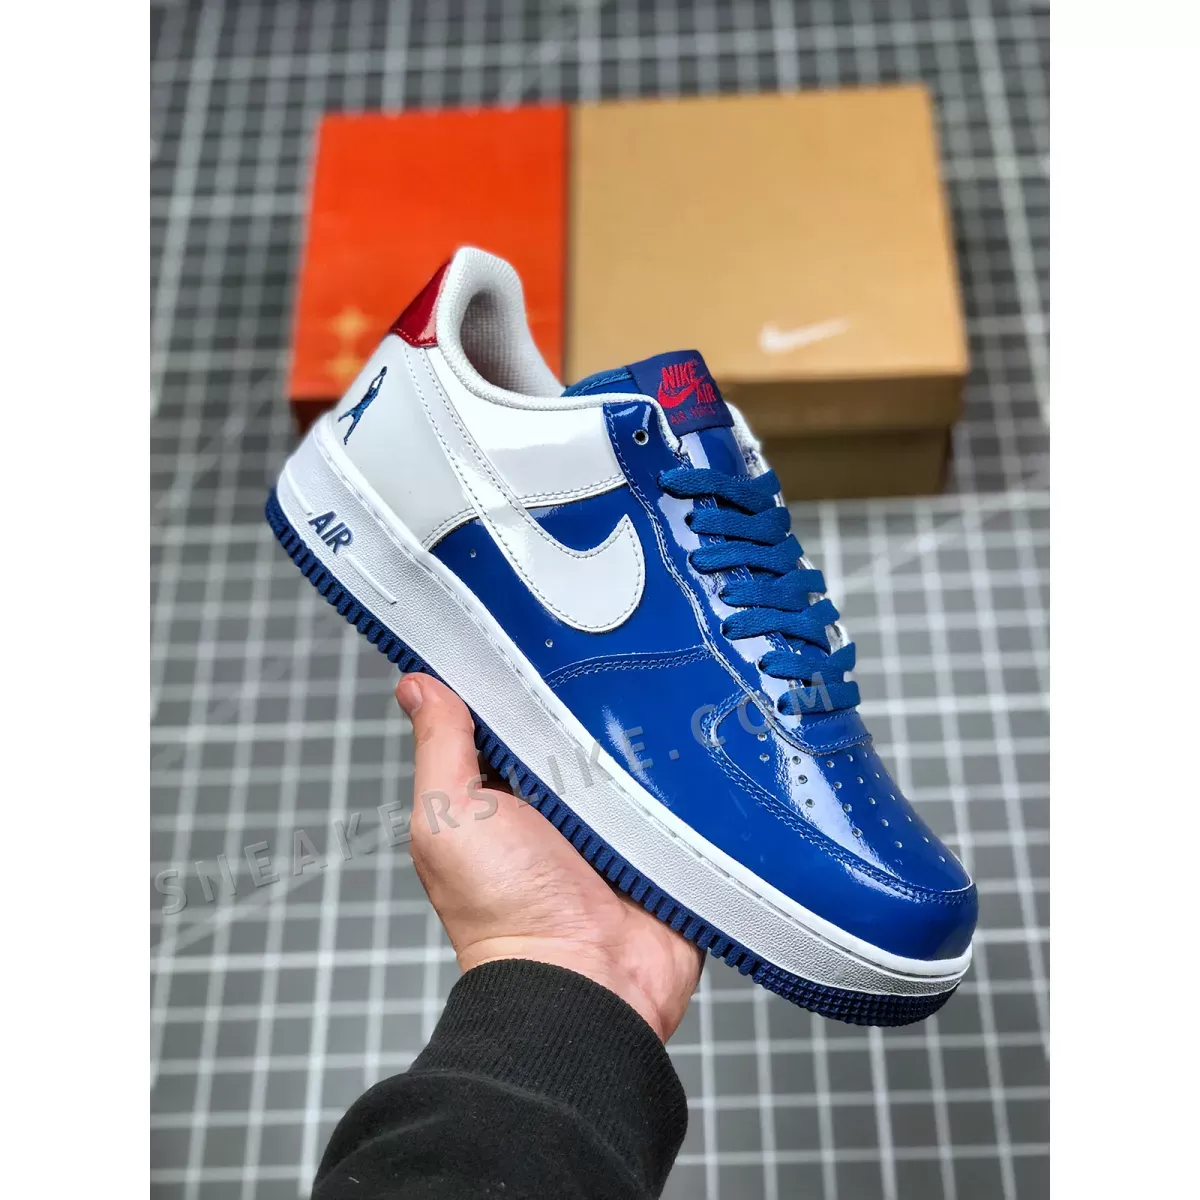 Nike Air Force 1 Sheed Low Blue Jay/White-Varsity Red 306347-411 New Releases